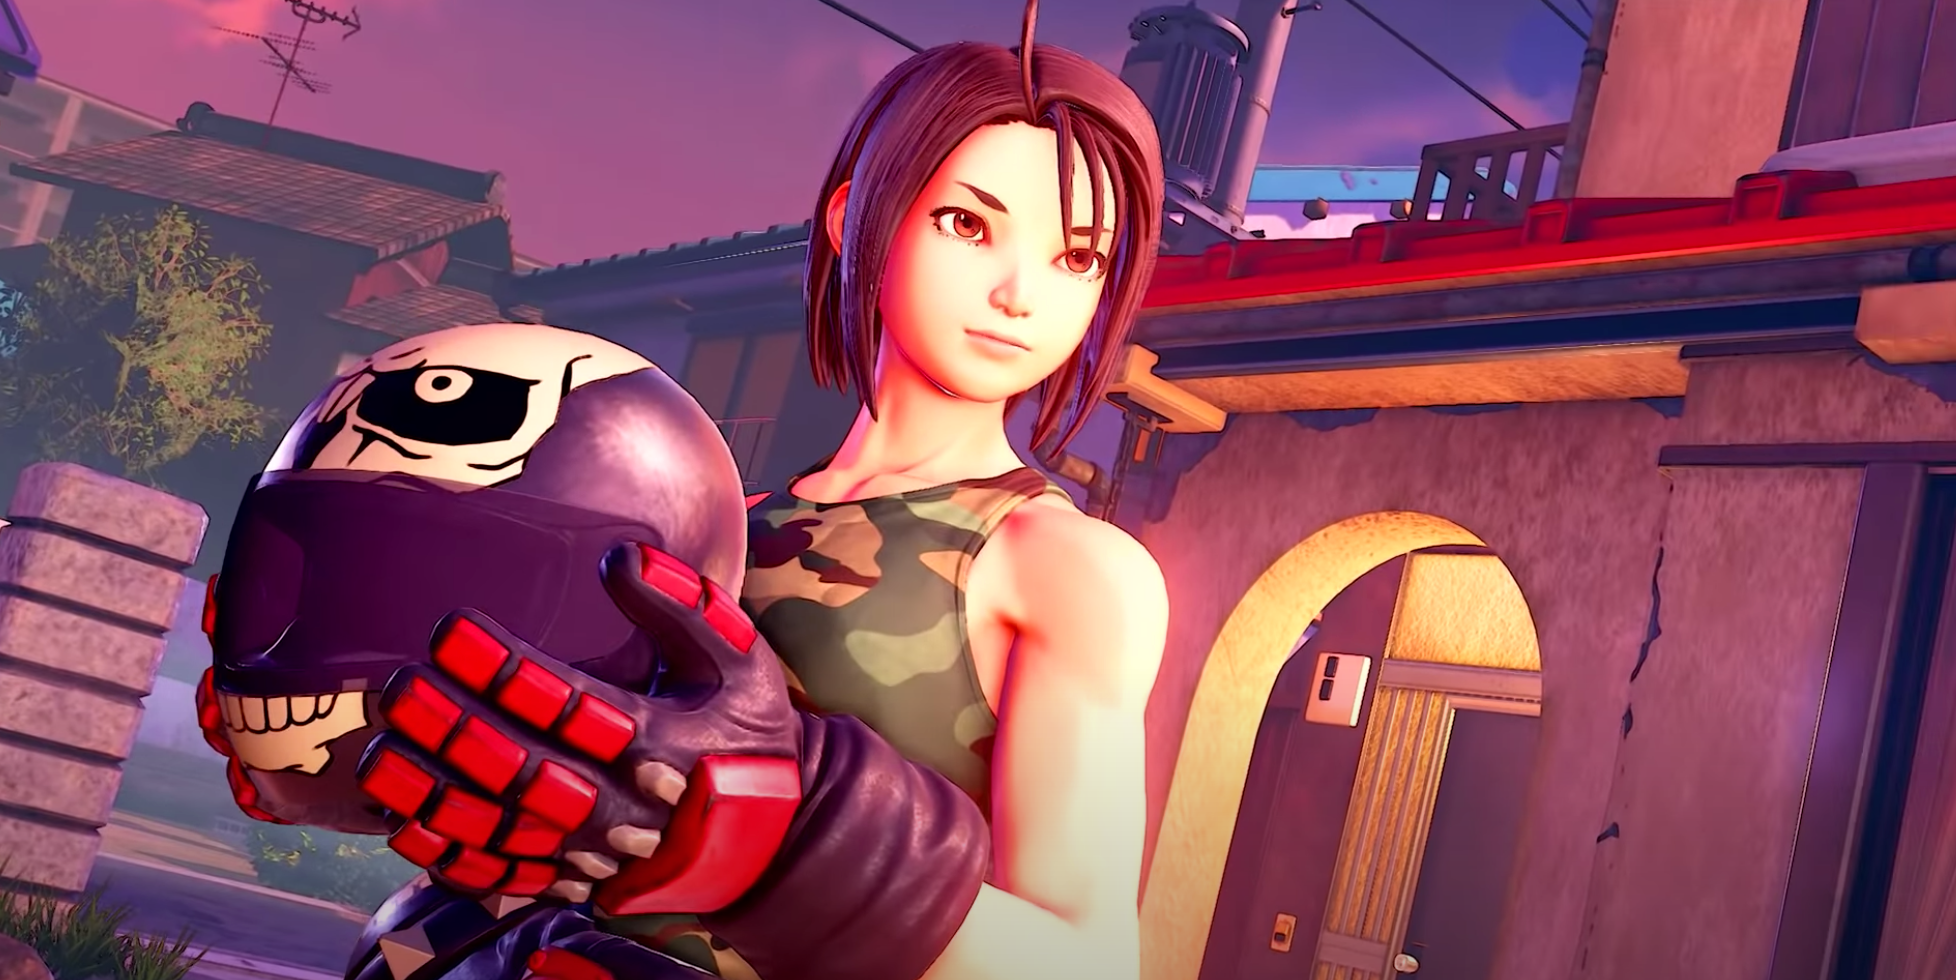 Image for You can play as Oro and Rival Schools' Akira in Street Fighter 5 from today